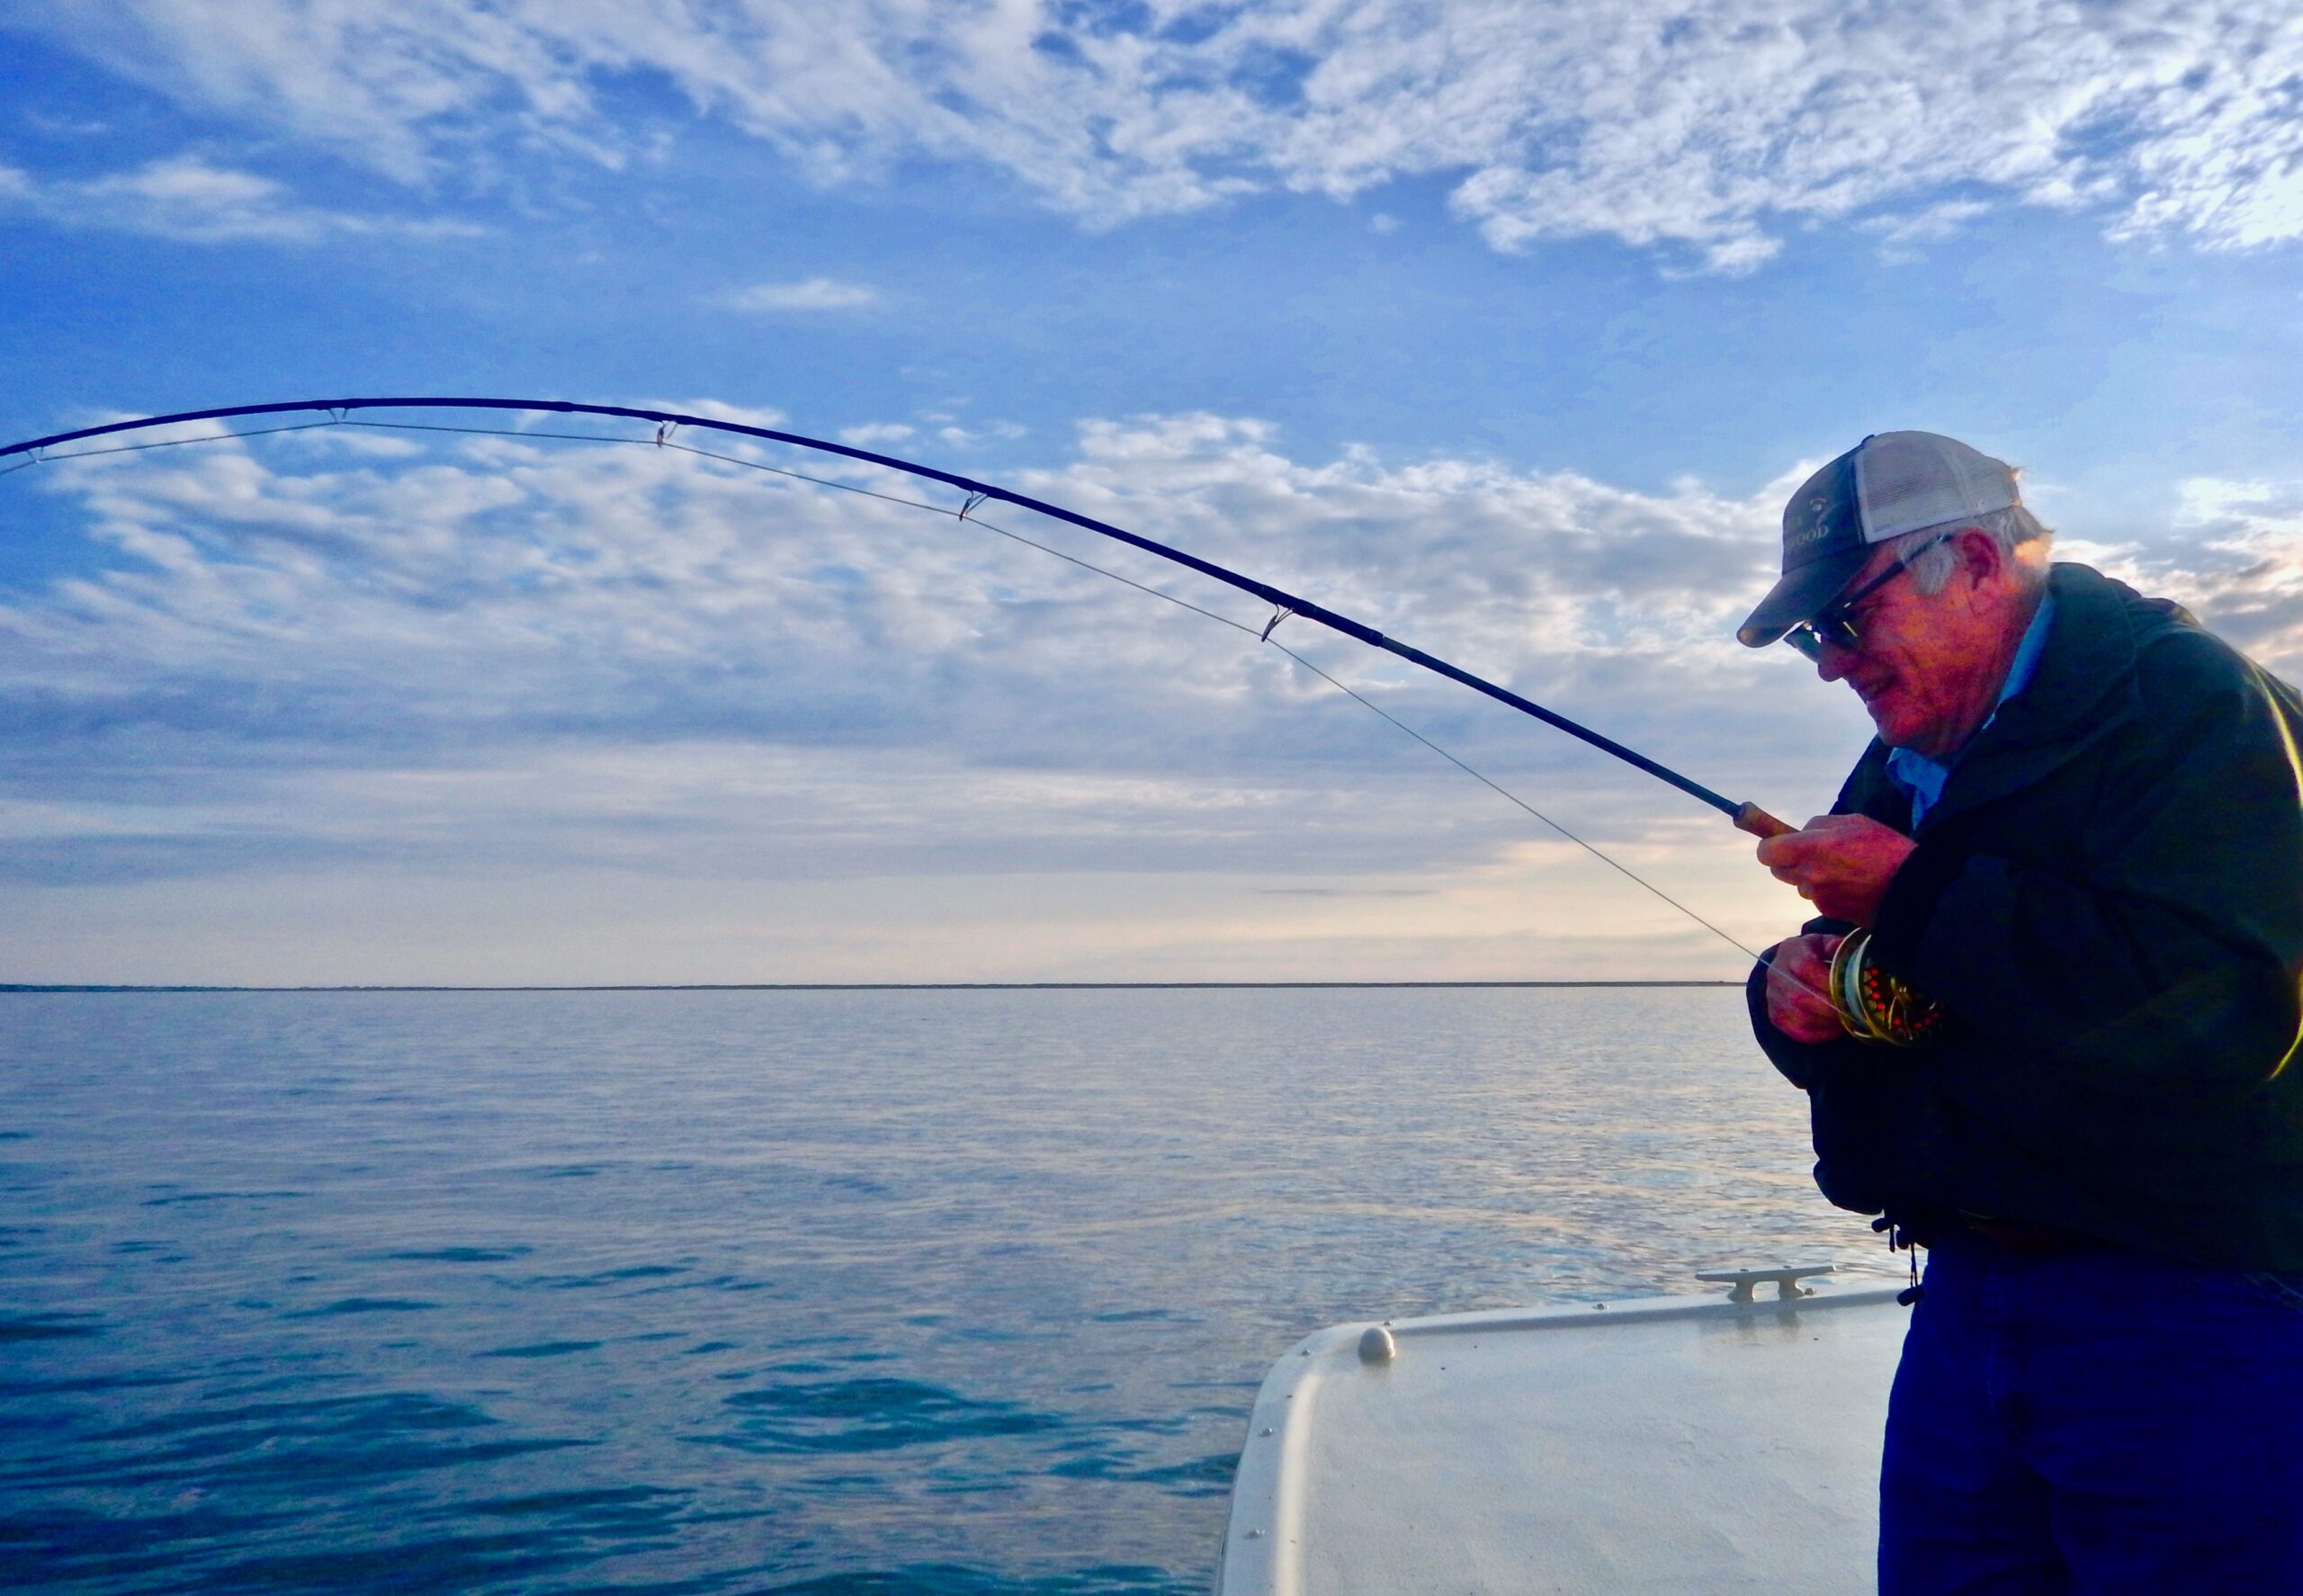 World-Class Morning On The Fly! – Baymen Guide Service, Inc